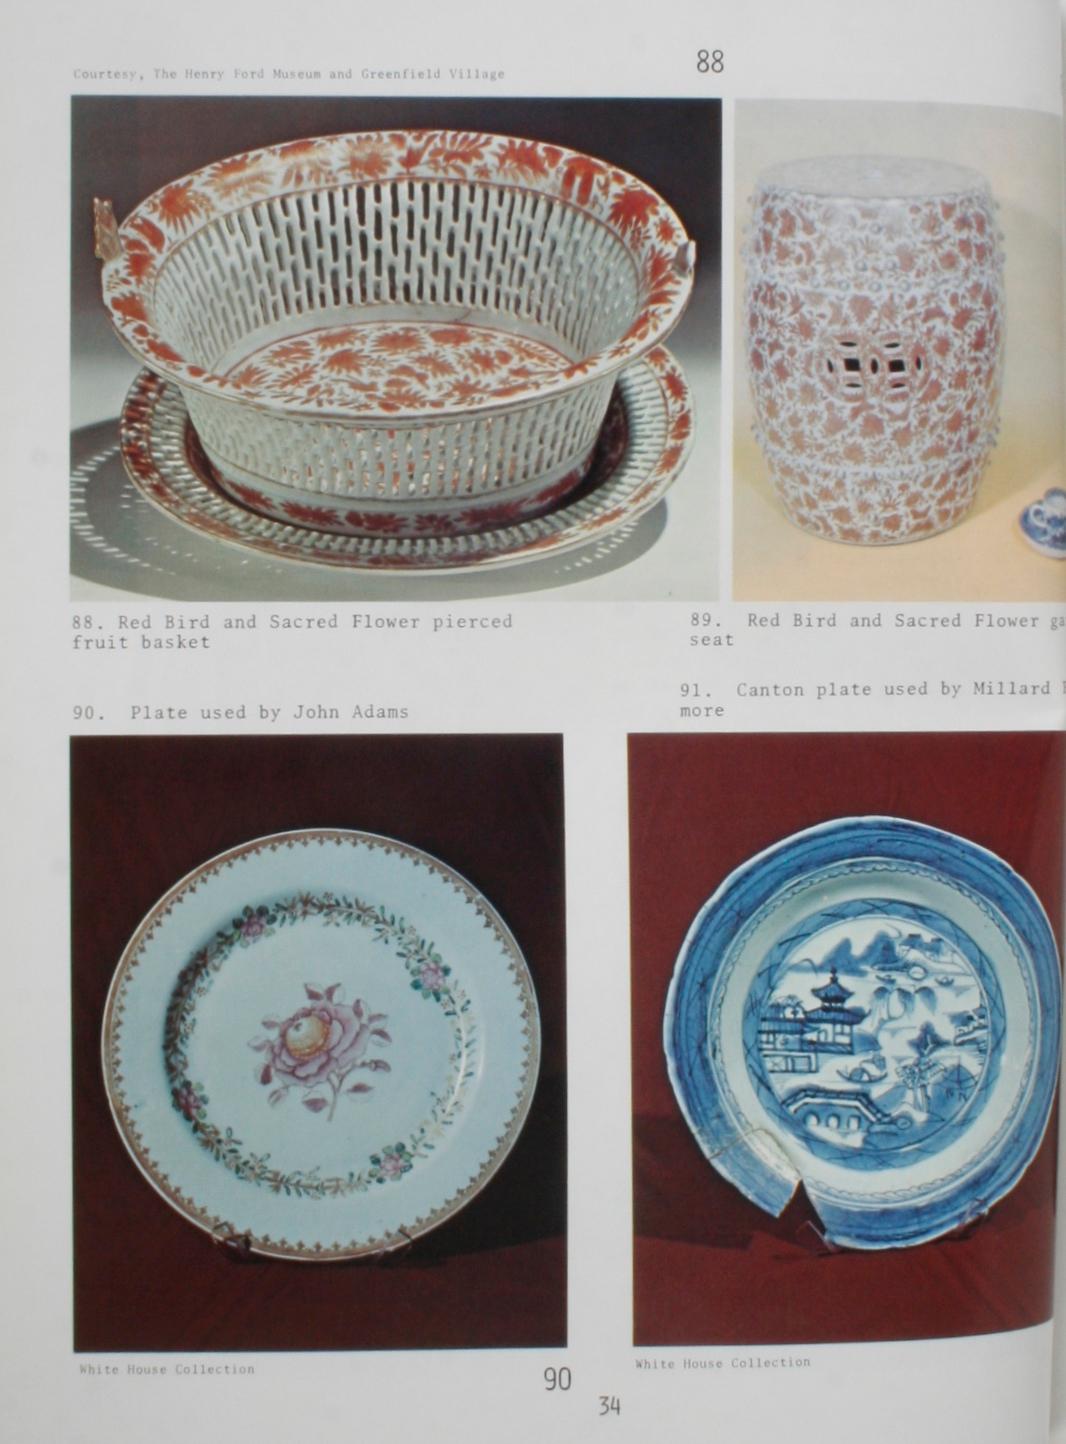 Chinese Export Porcelain, Standard Patterns and Forms, 1780-1880, First Edition For Sale 11